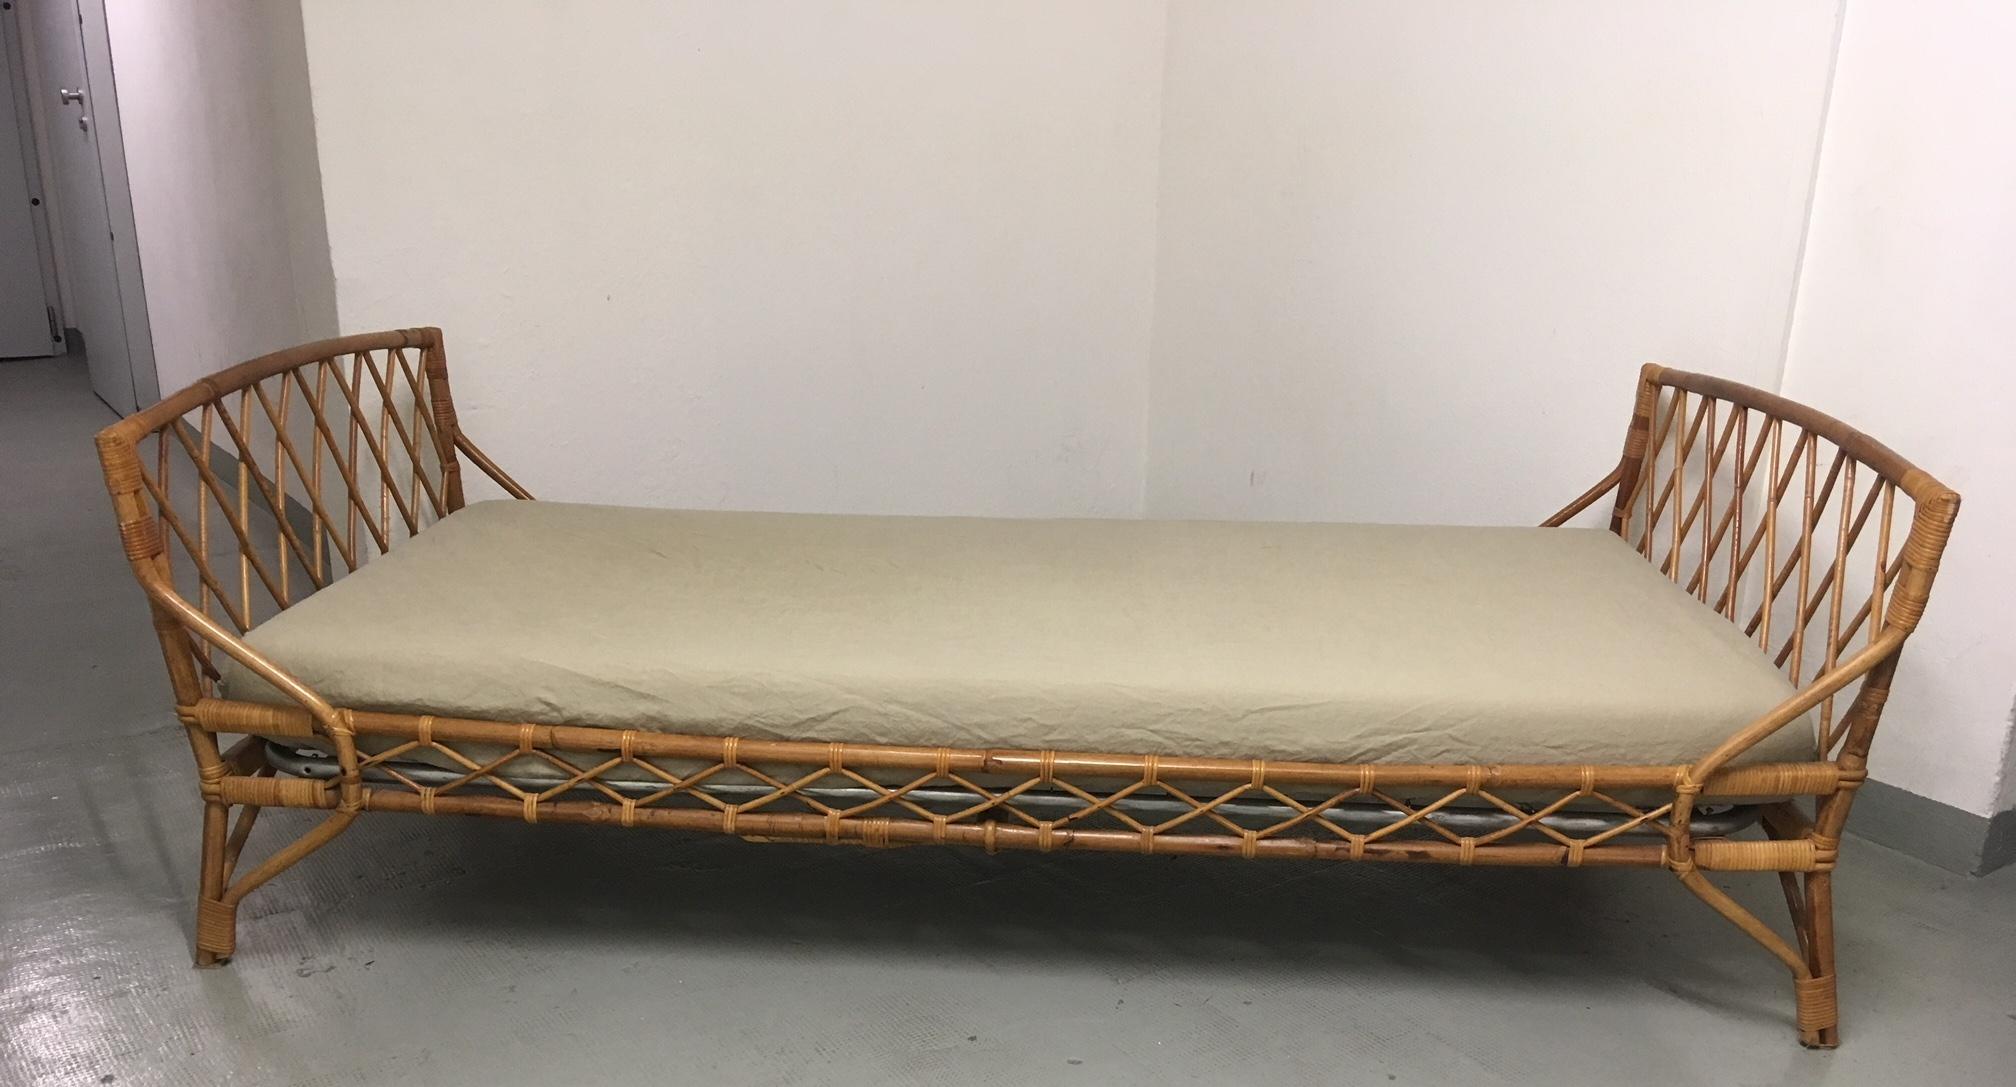 1950s Italian bamboo and rattan daybed
Very good condition, metal bedsteads
2 pieces available.
Sold without matress
 